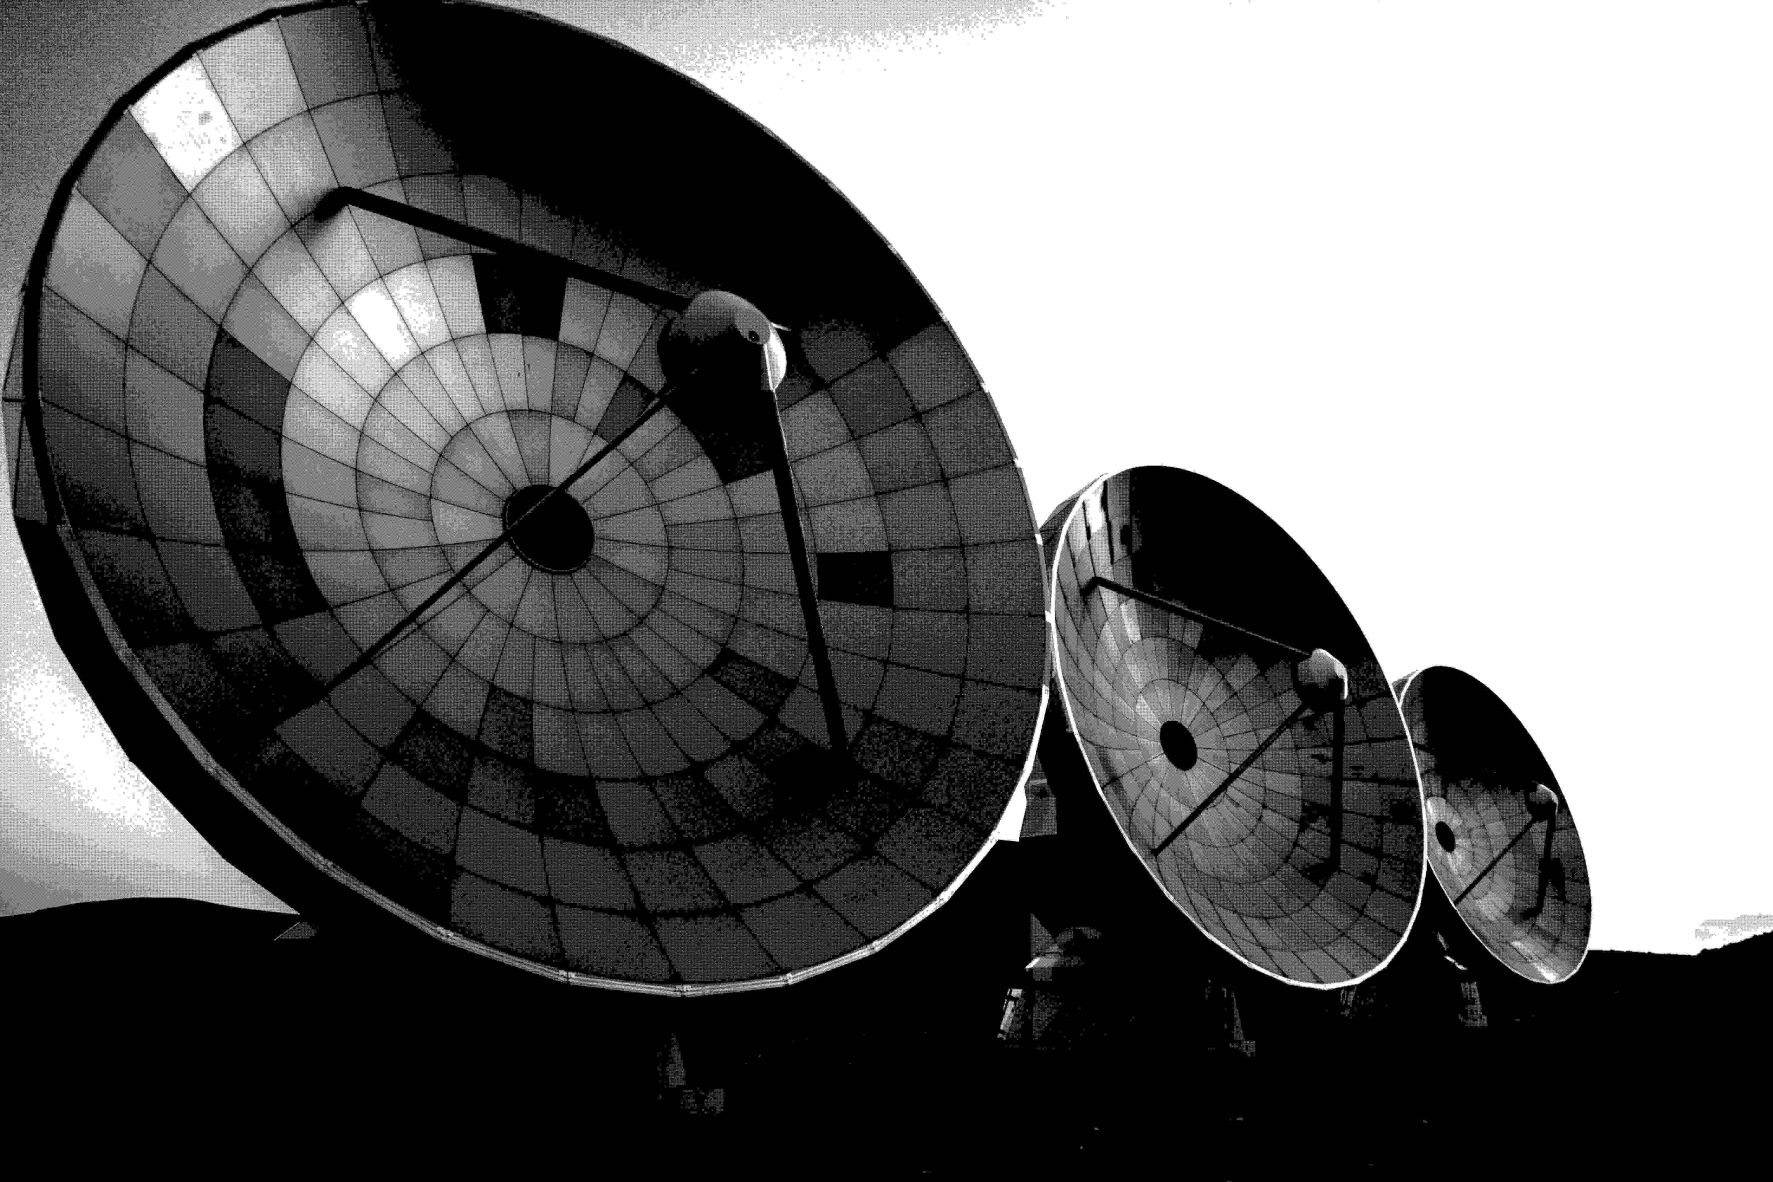 Dithered Image of some Antenna Dishes - img attr - Gontran Isnard